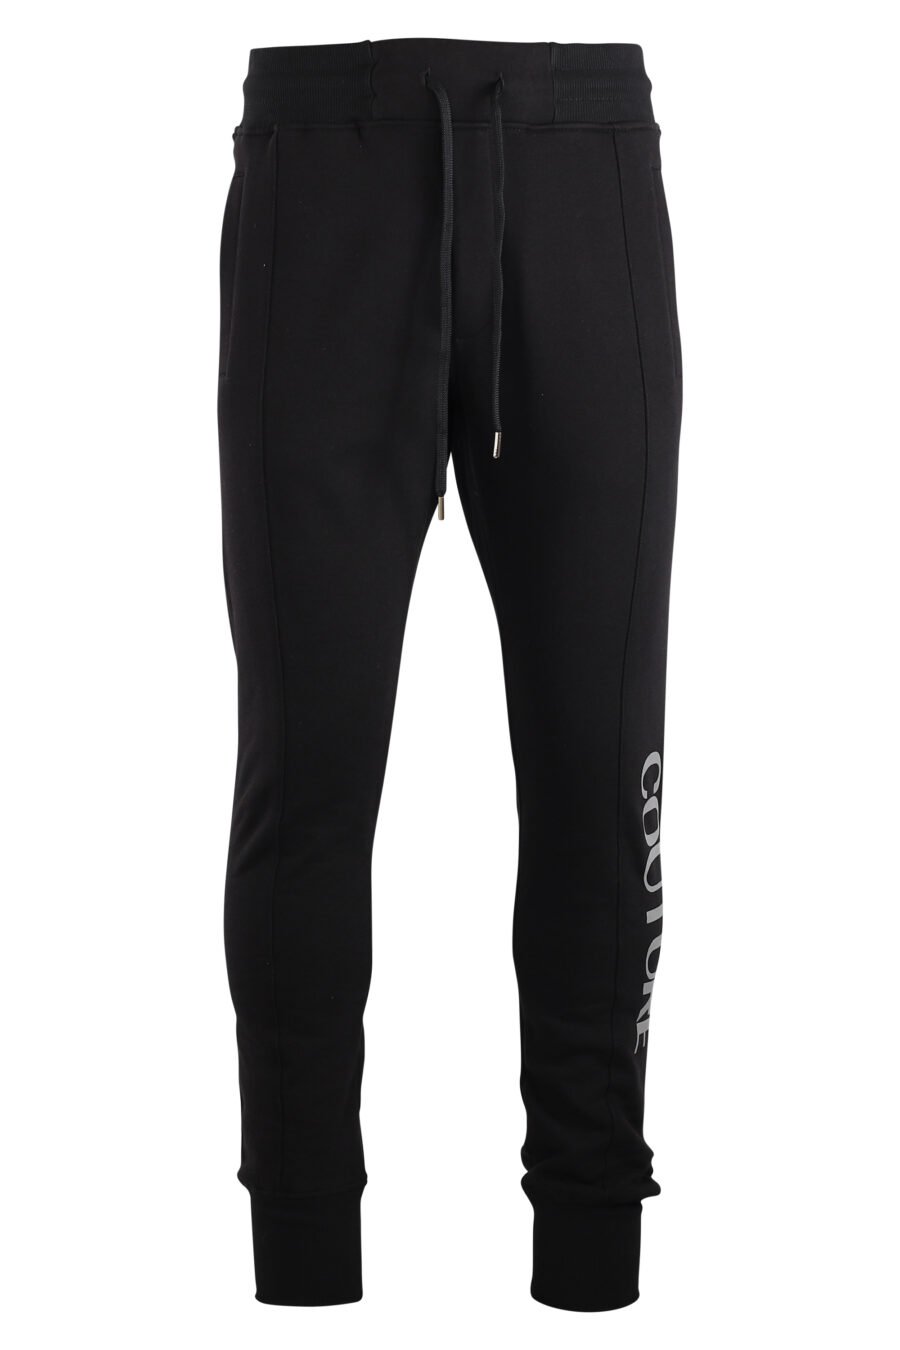 Tracksuit bottoms black with silver vertical logo - IMG 7501